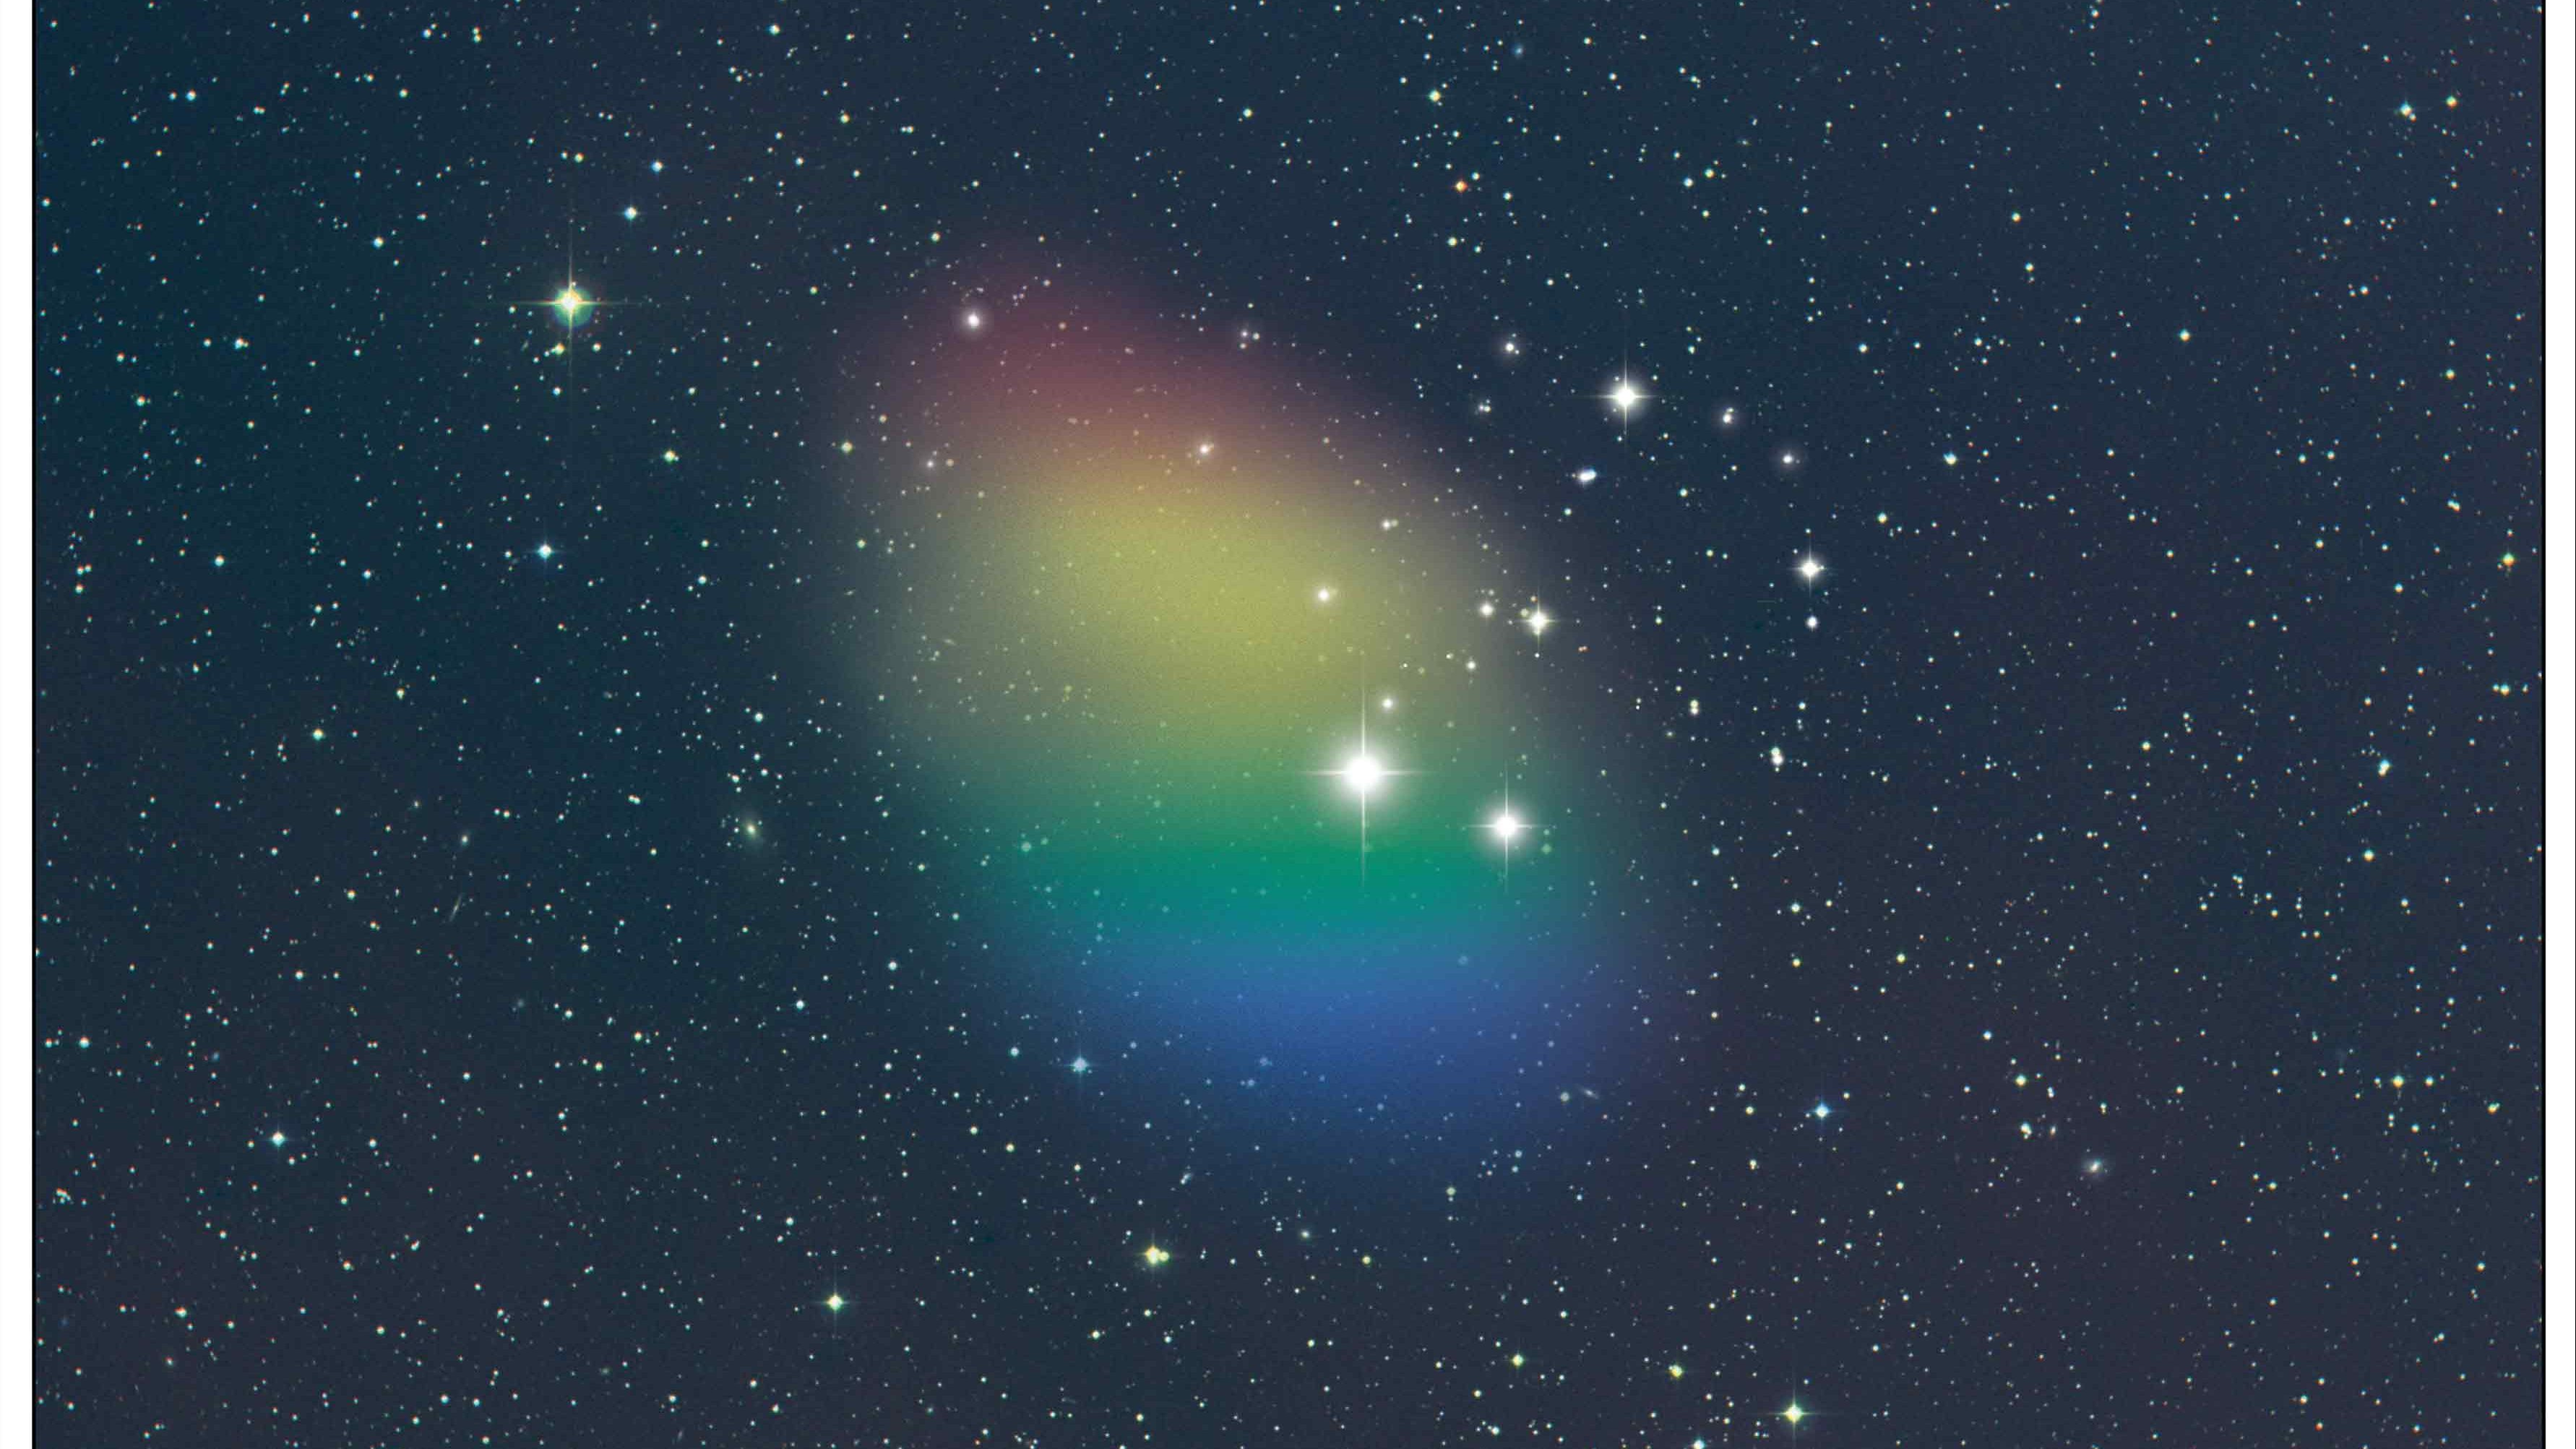 An image of a colorful object resembling a dark primordial galaxy in the sky.